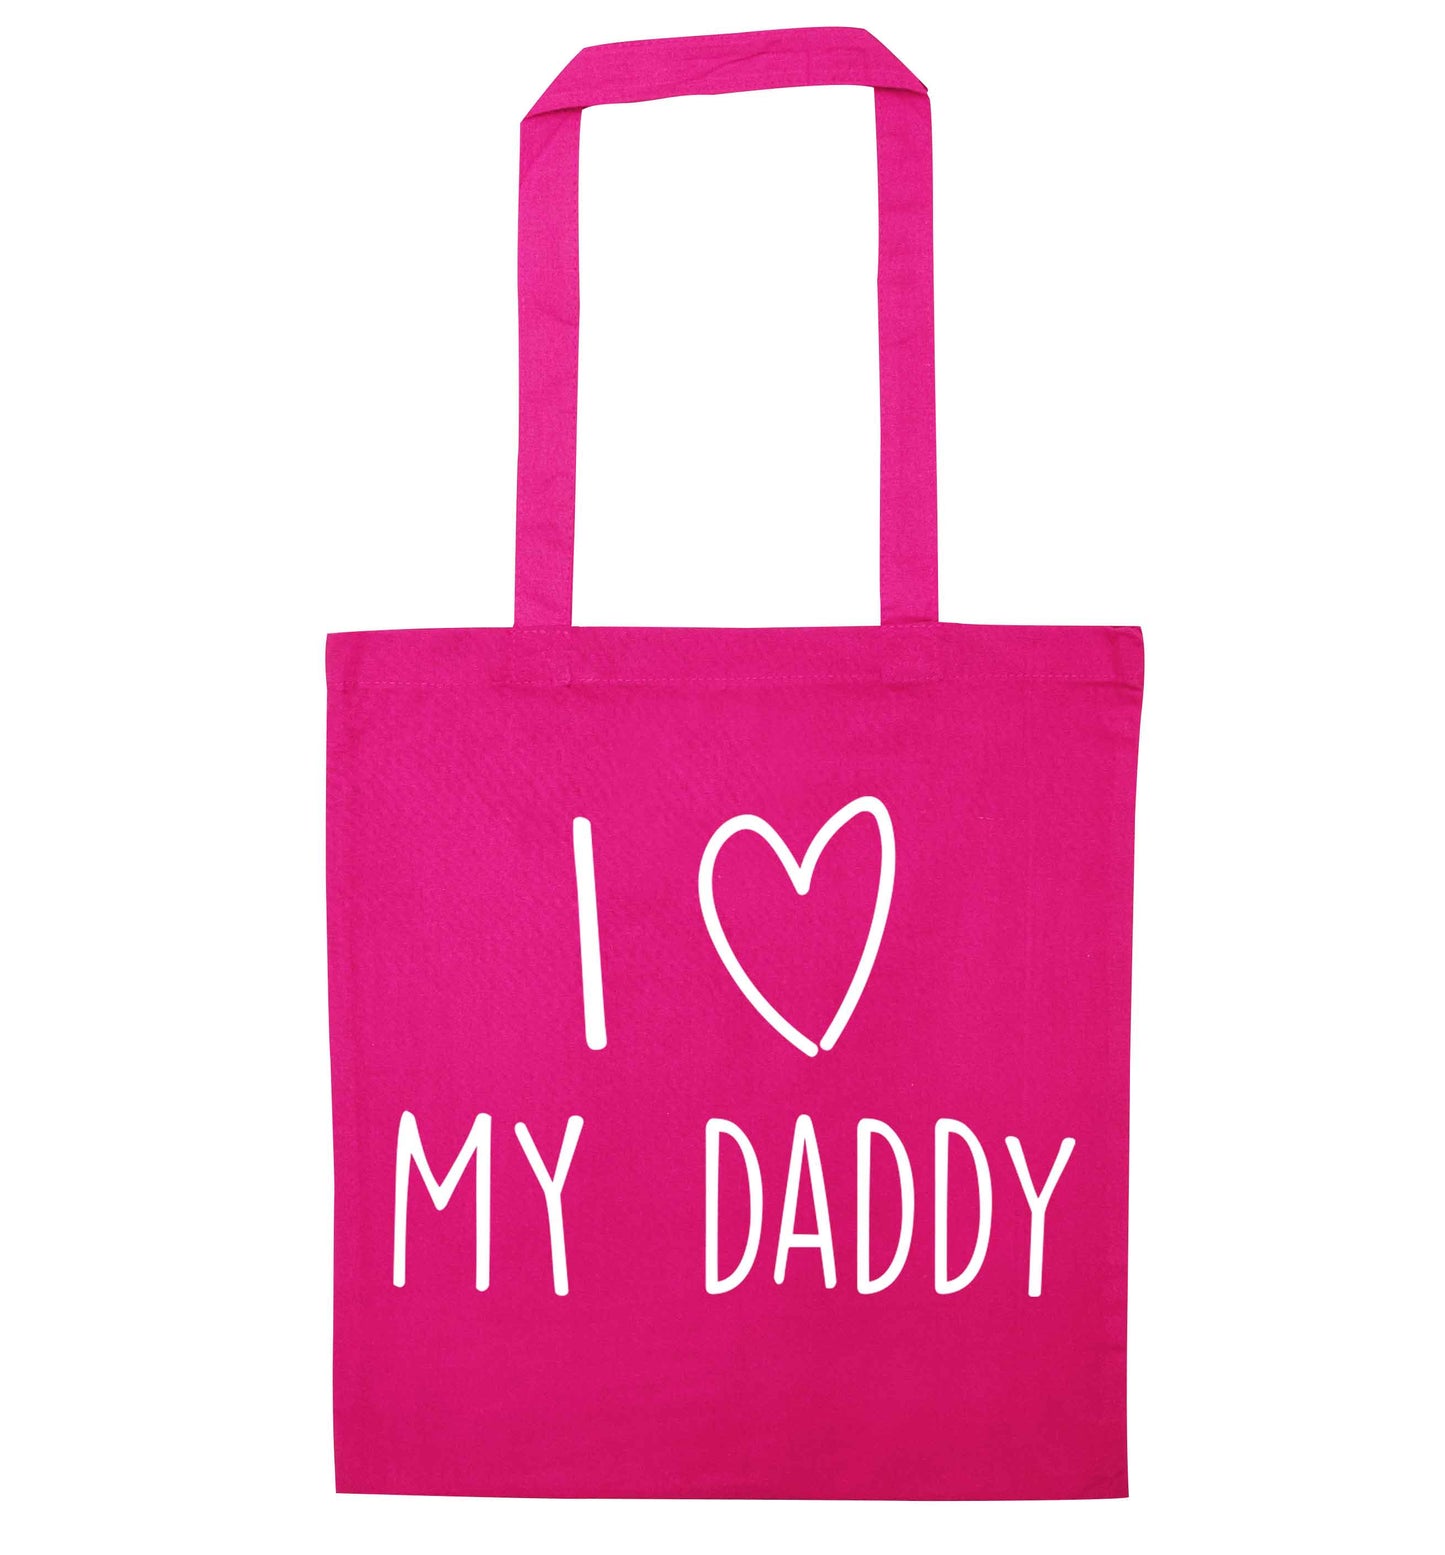 I love my daddy pink tote bag